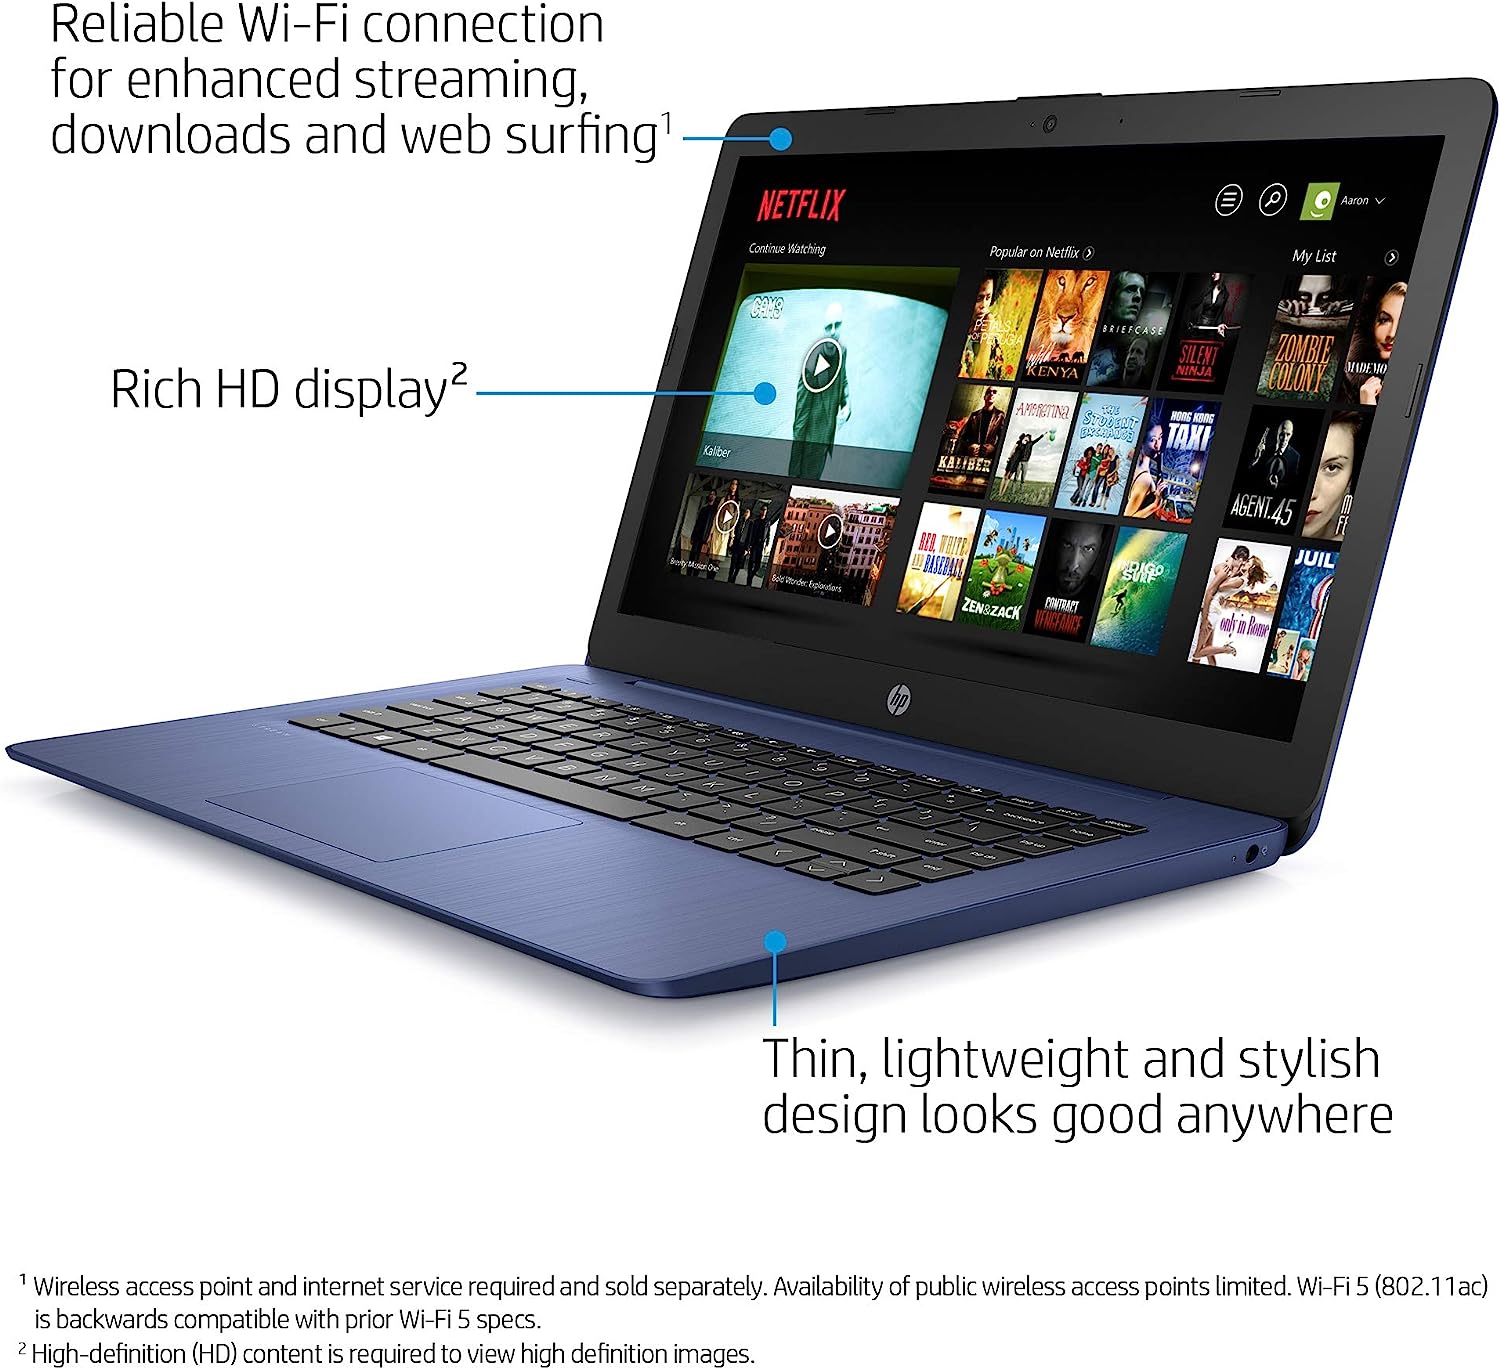 HP Stream 14-inch Laptop, Intel Celeron N4000, 4 GB RAM, 64 GB eMMC, Windows 10 Home in S Mode With Office 365 Personal For 1 Year (14-cb185nr, Royal Blue)